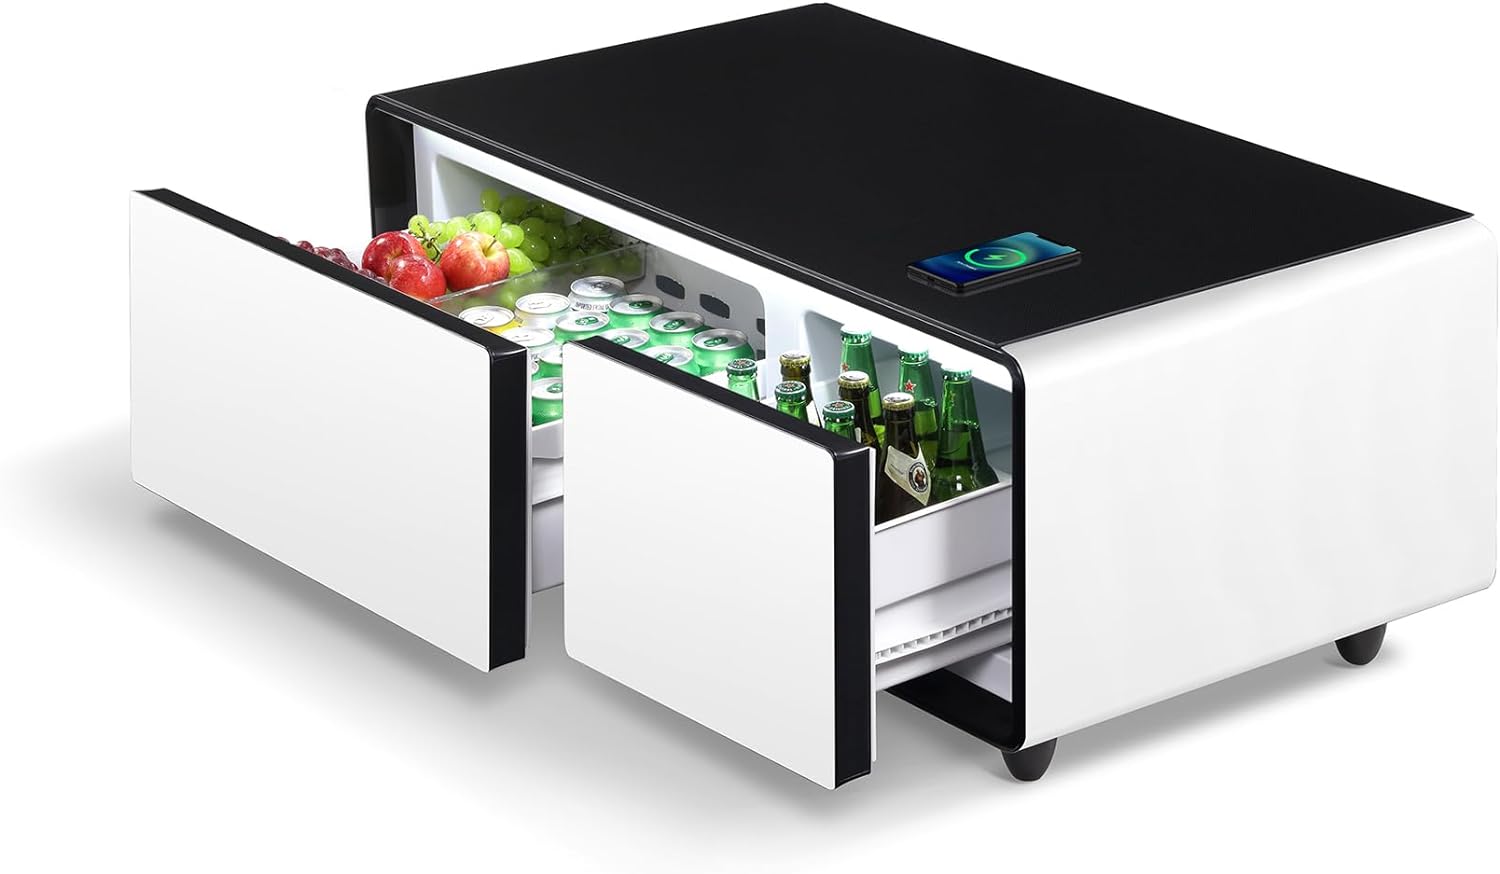 Gynsseh Smart Coffee Table with Fridge: The Ultimate Combination of Style and Functionality